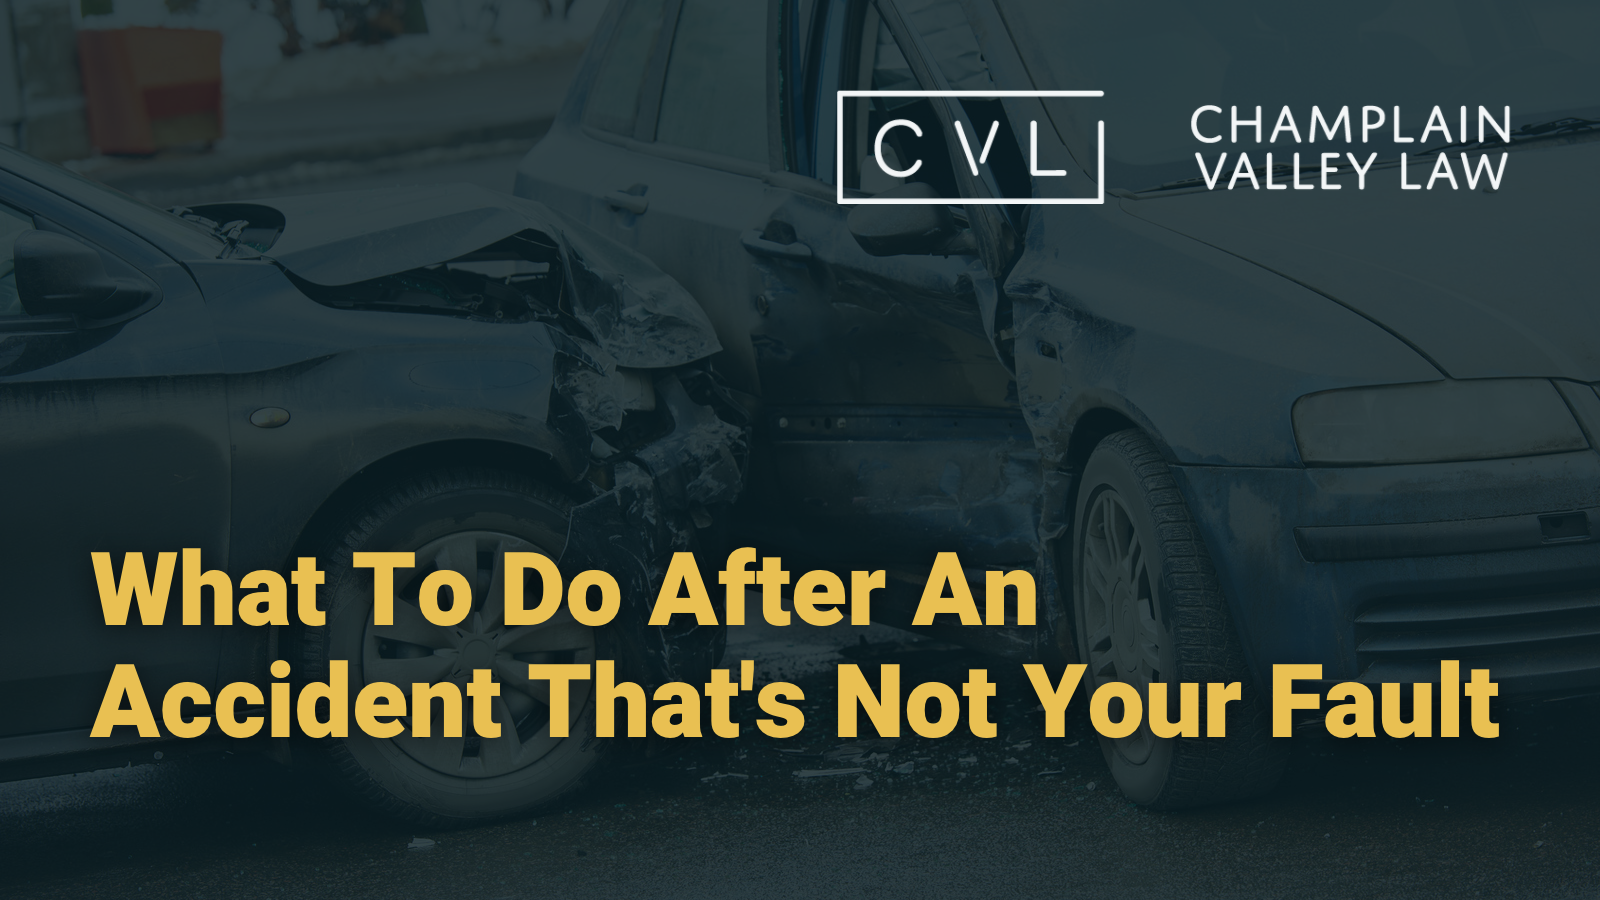 What To Do After An Accident That's Not Your Fault in vermont - Champlain Valley Law - Attorney Drew Palcsik